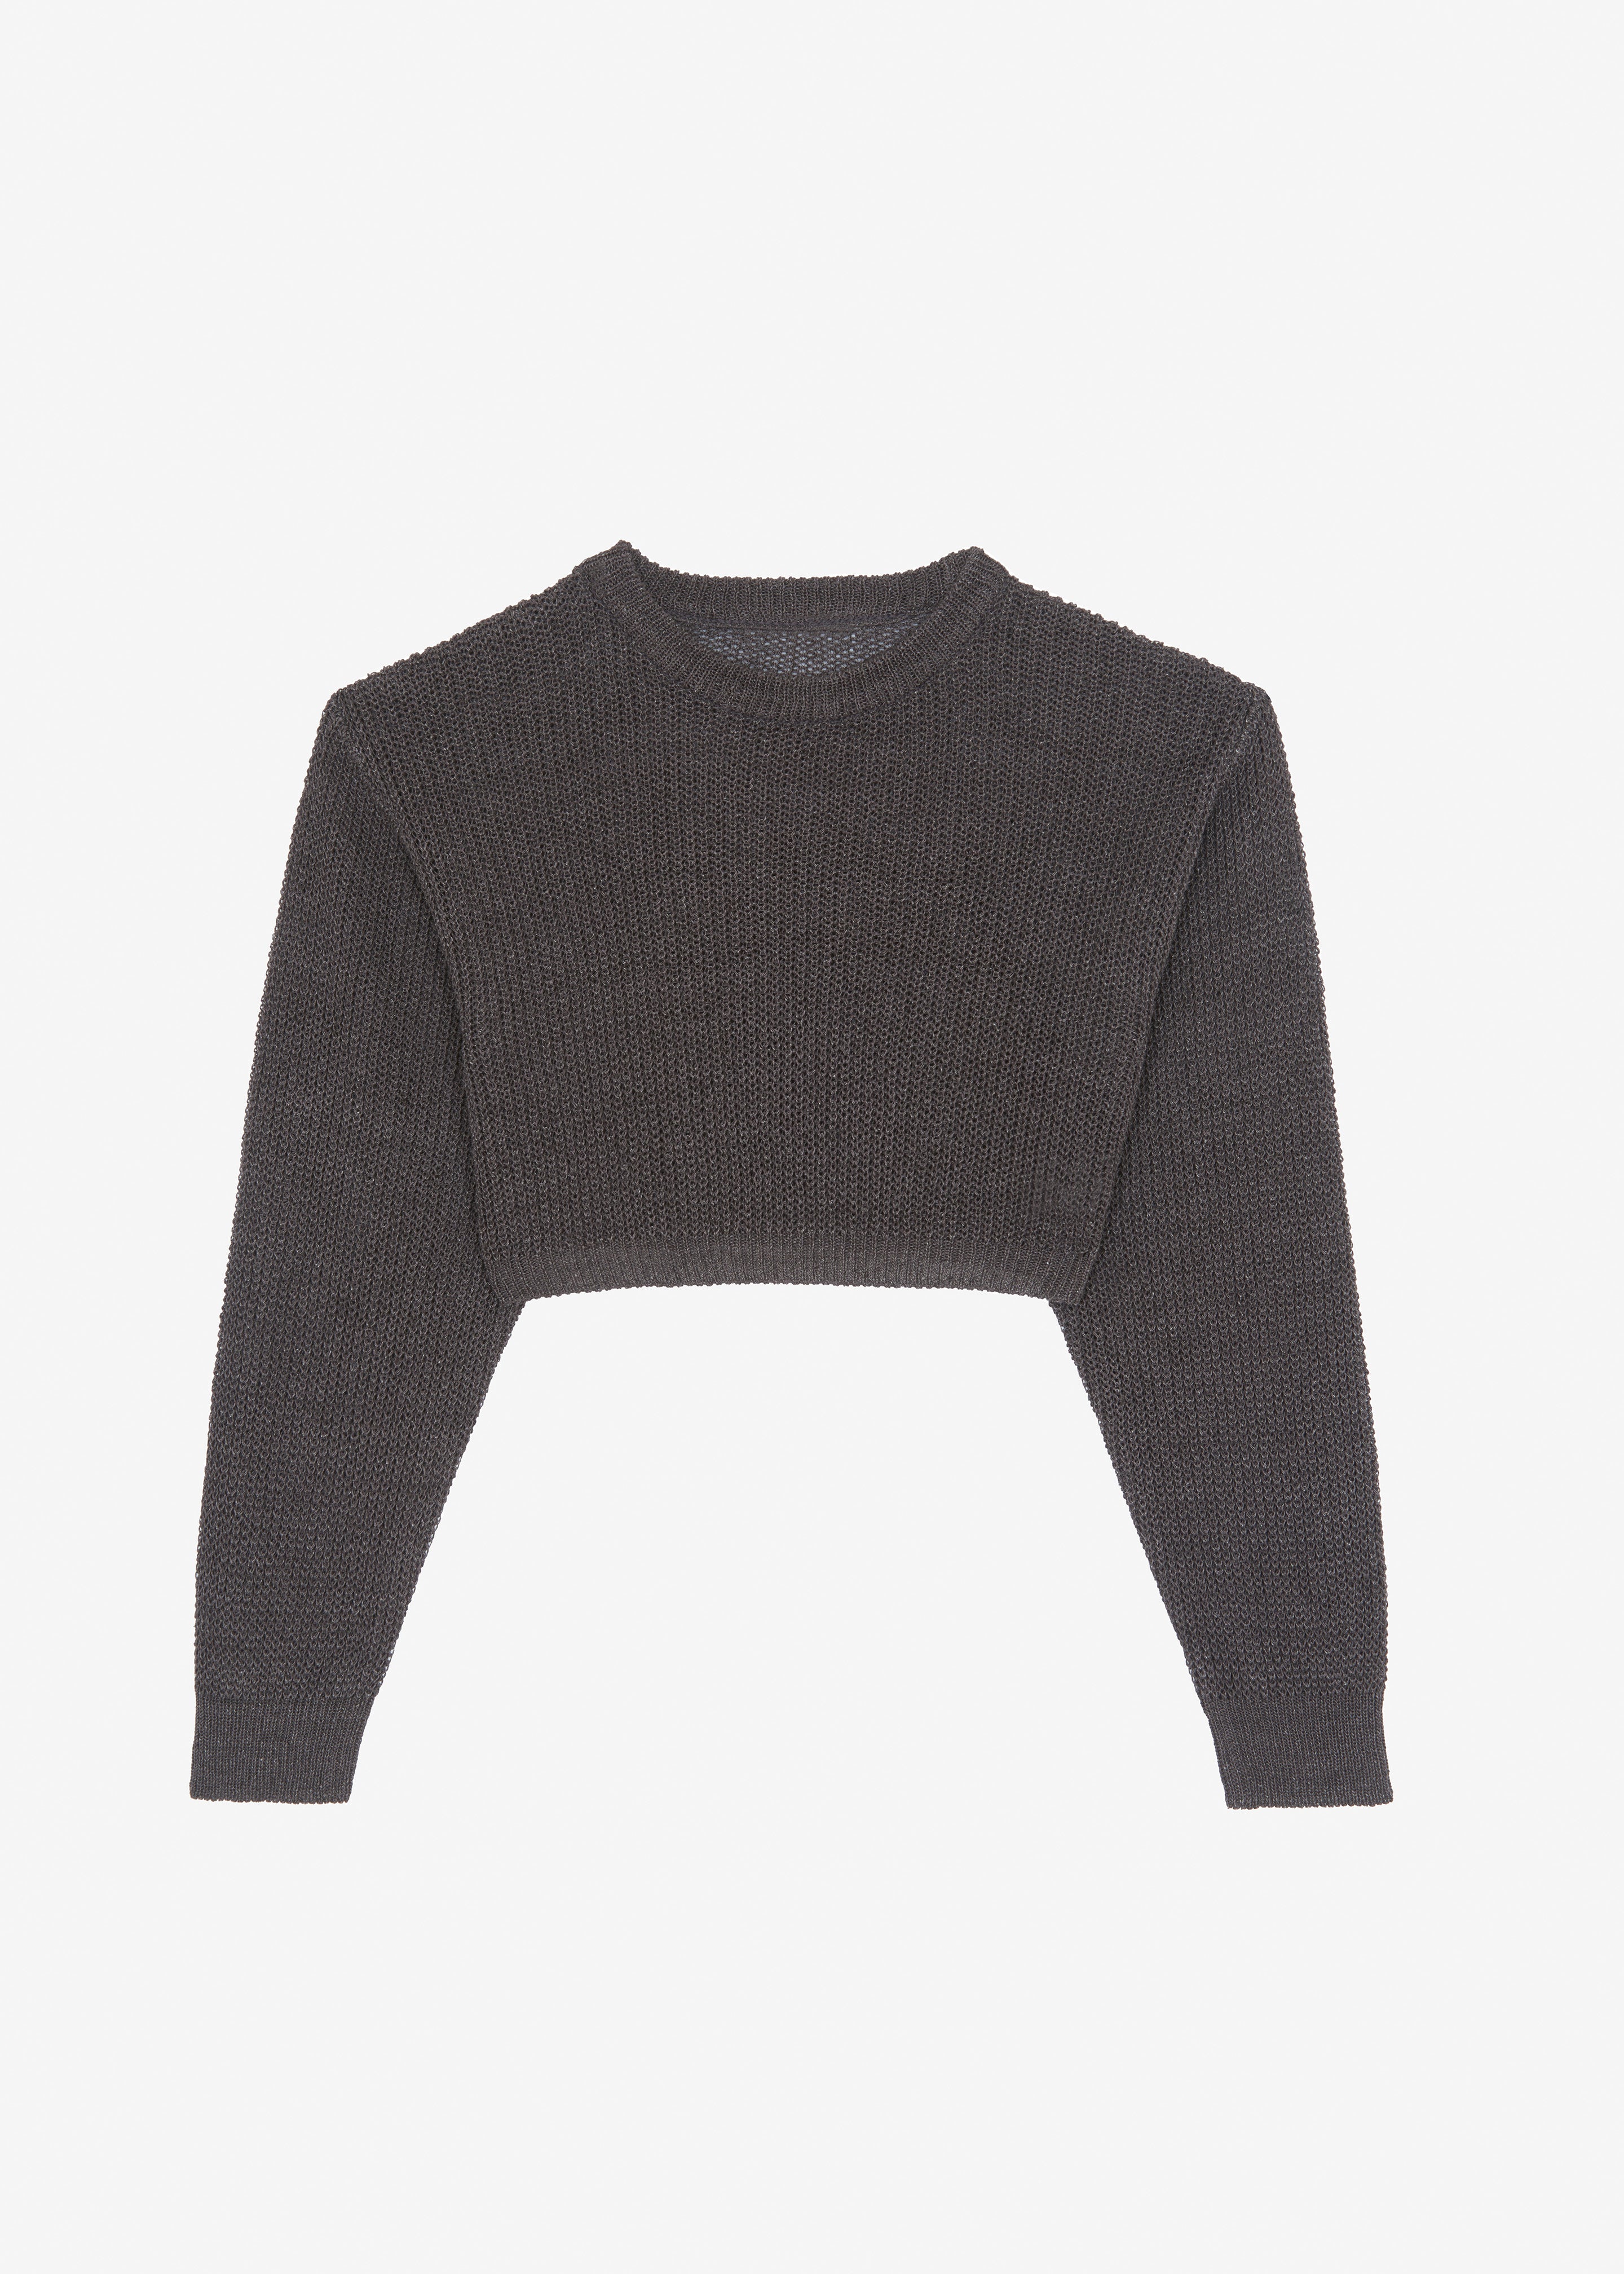 Abi Cropped Knit Top - Charcoal - 8